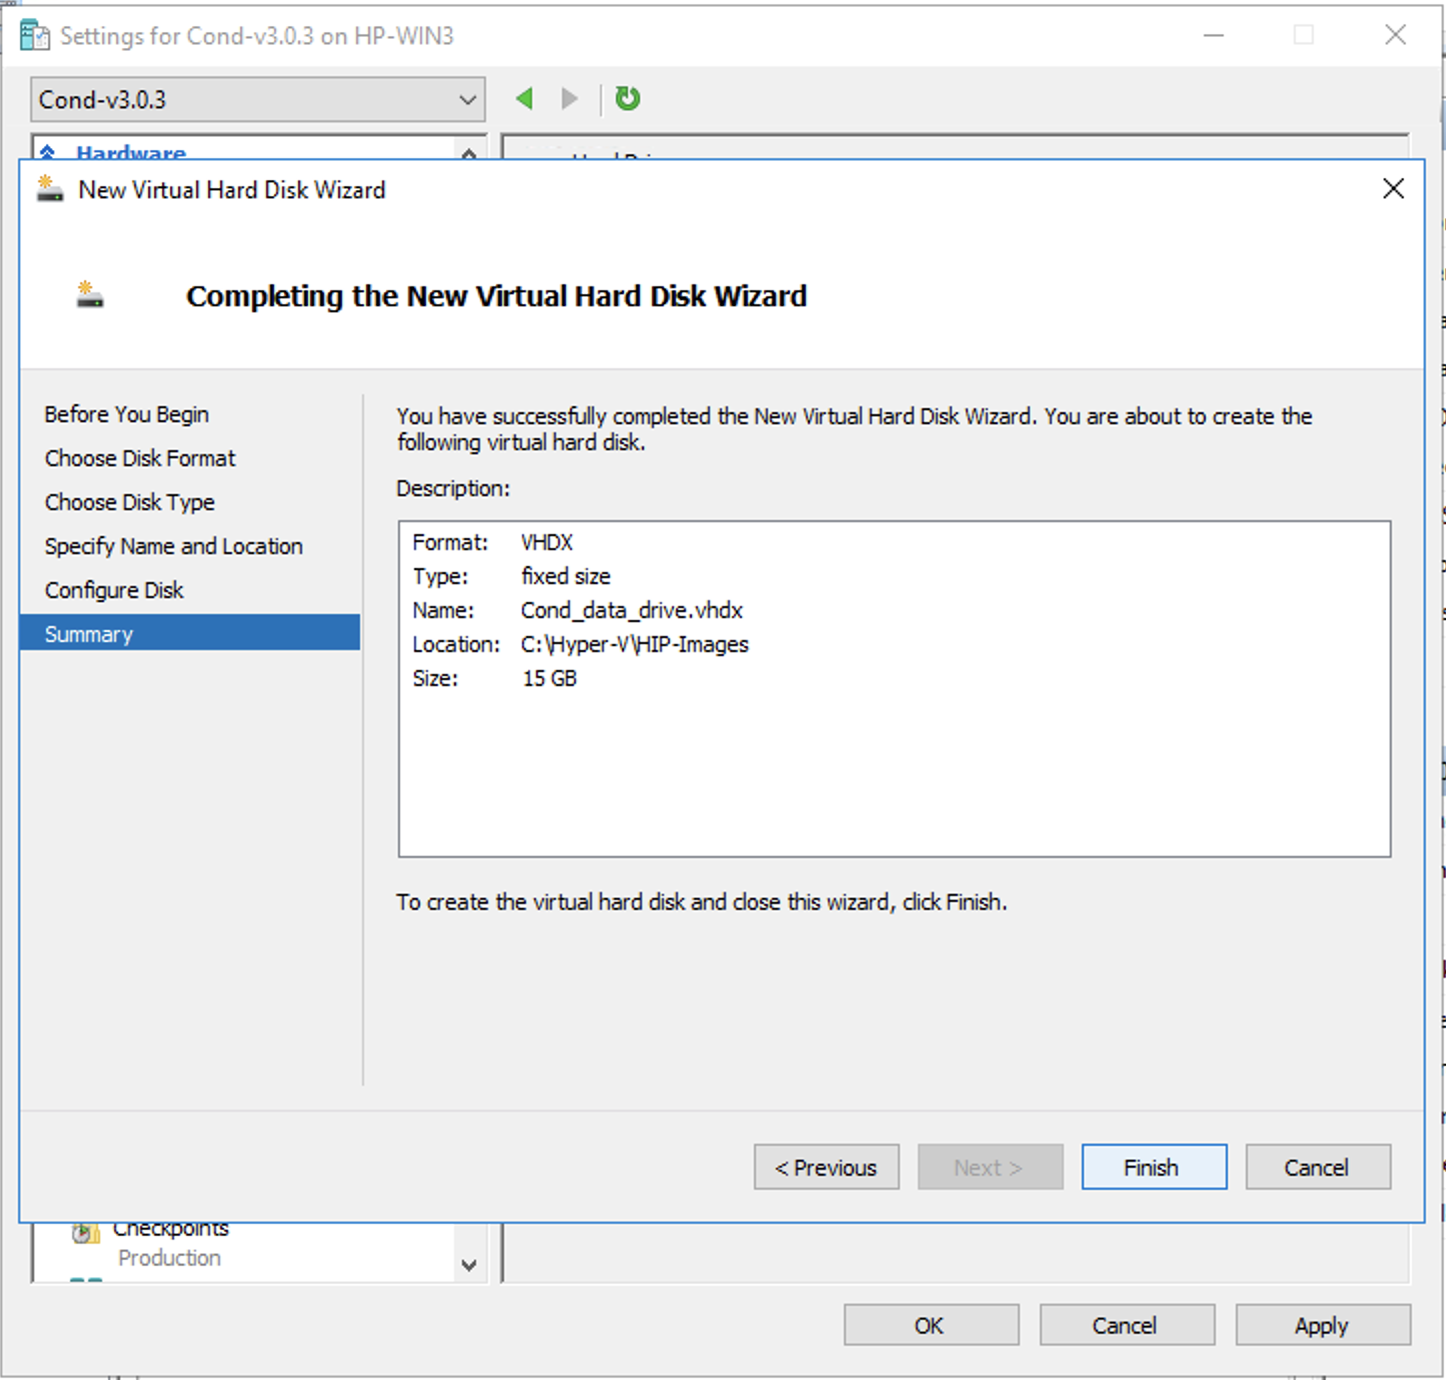 Settings for the Conductor VM: Virtual Hard Disk